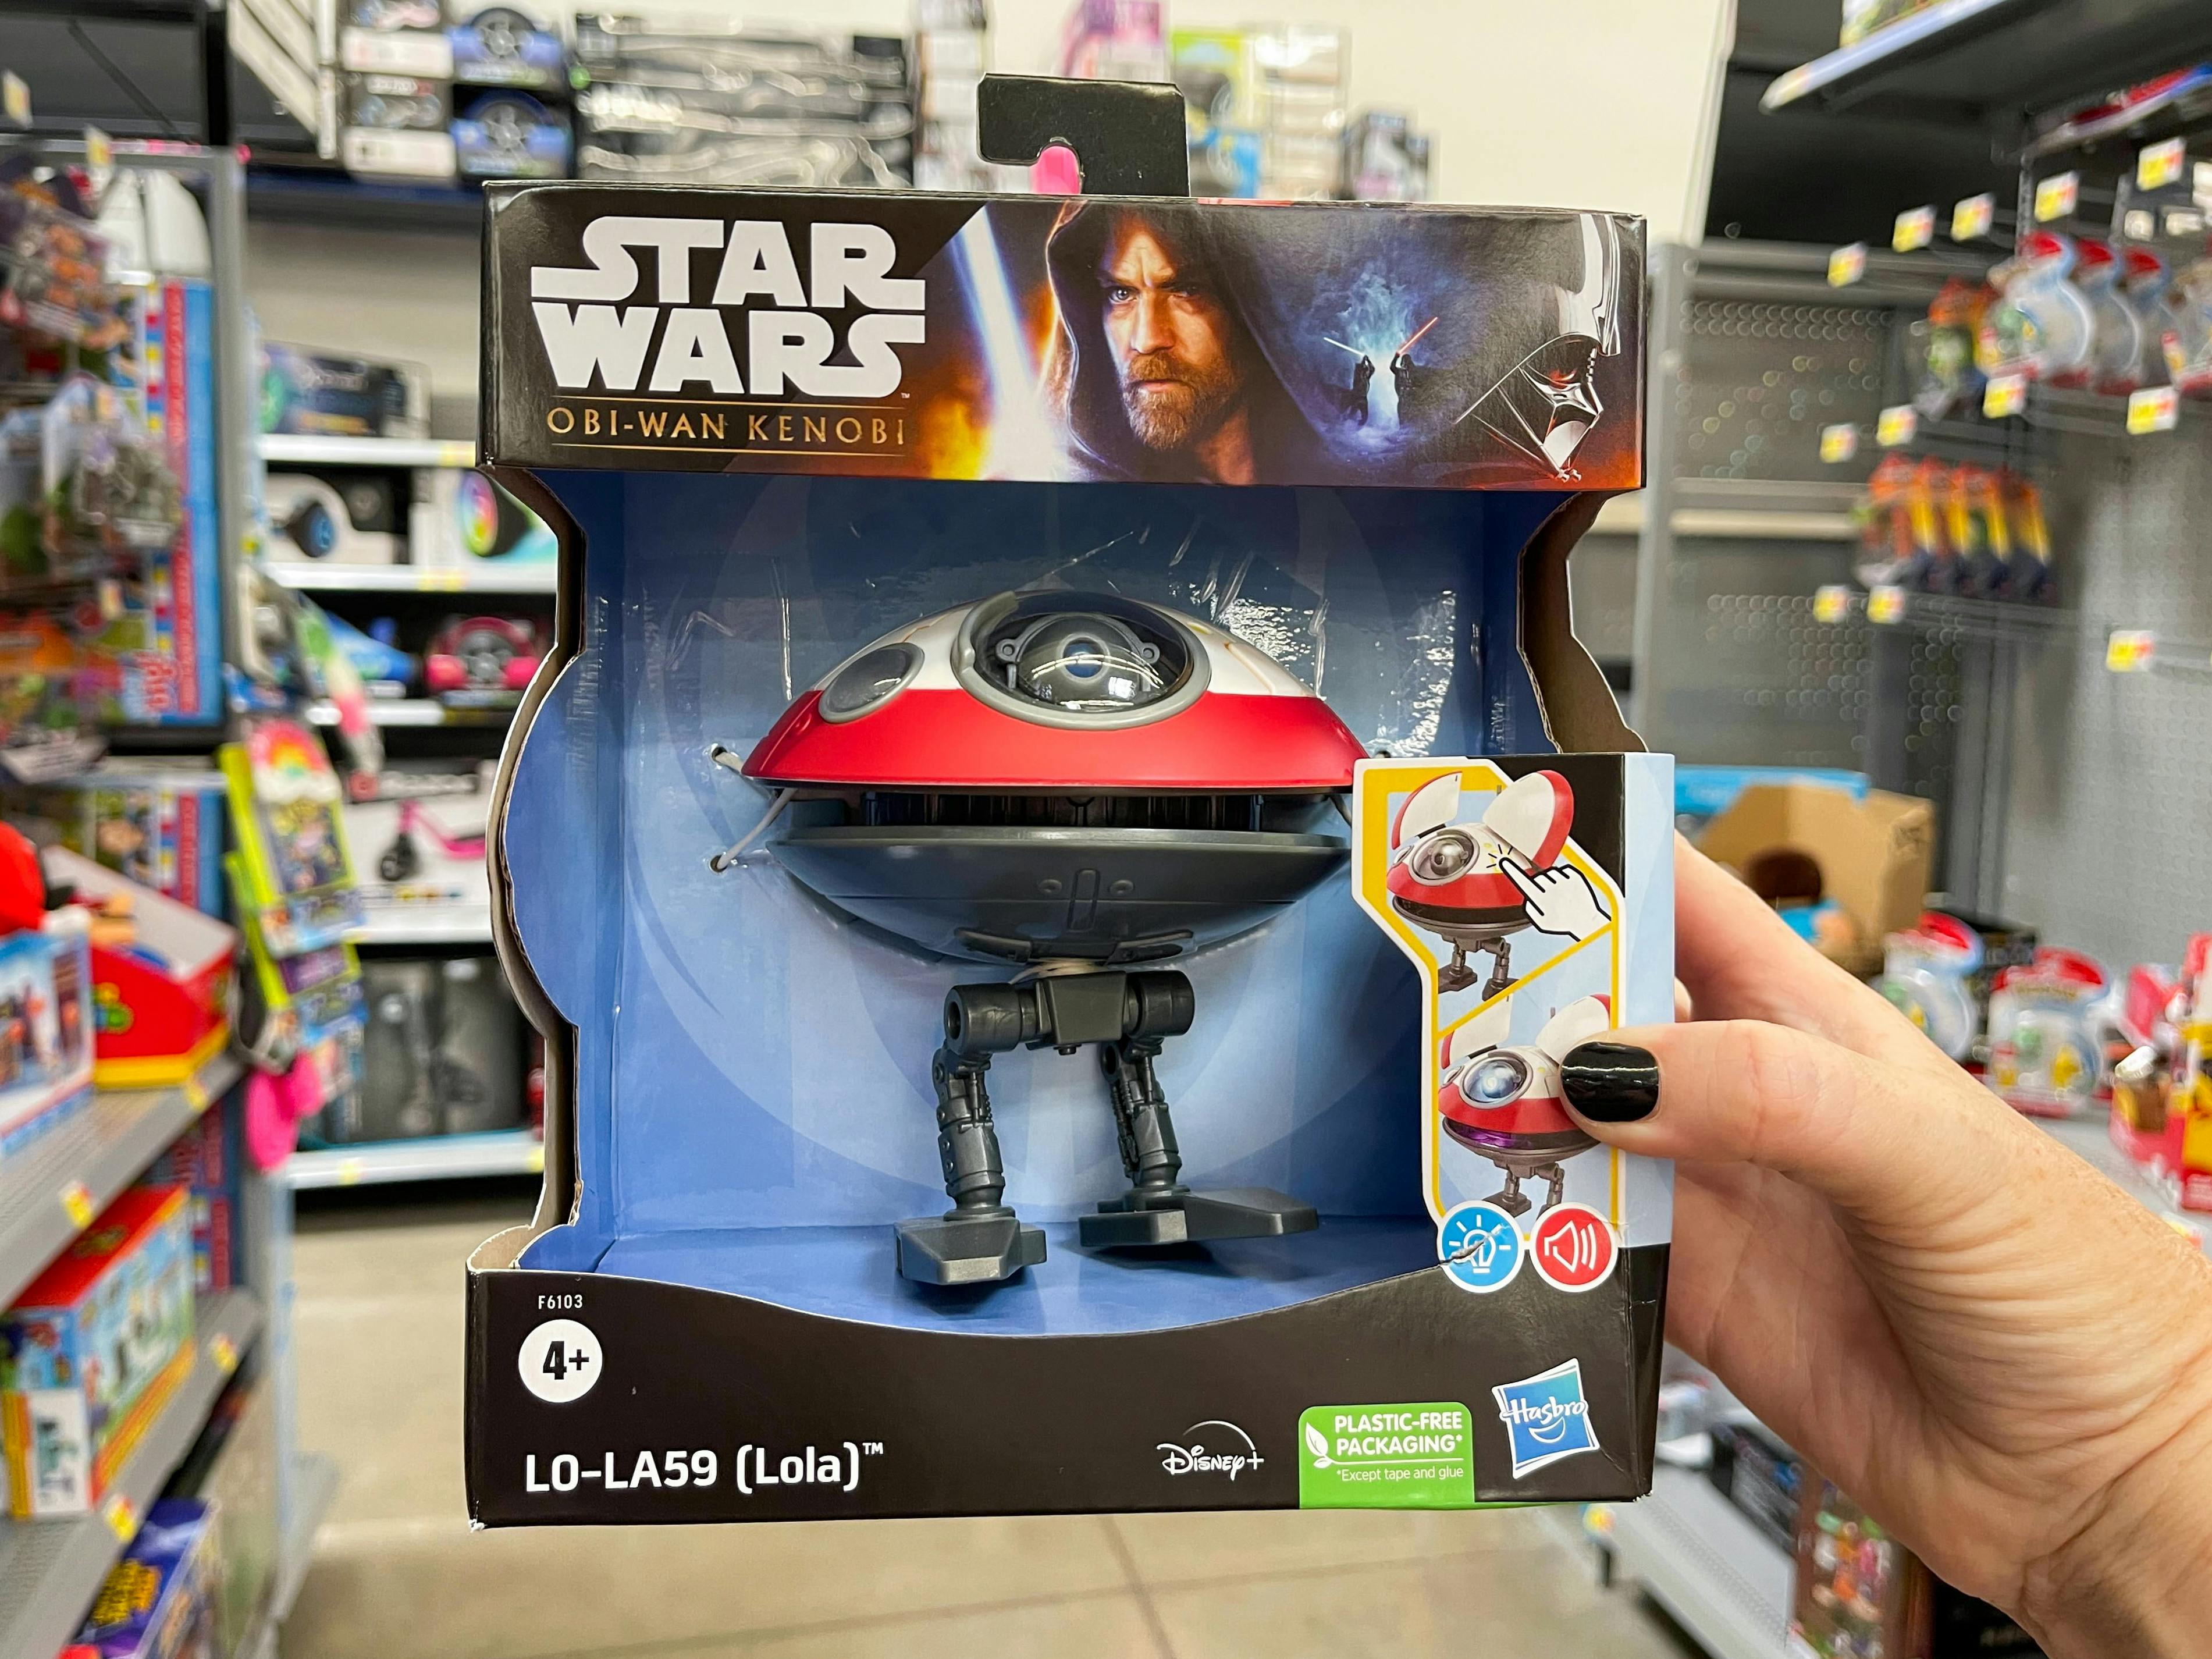 A person's hand holding a Star Wars Lola Droid toy in the toy aisle.